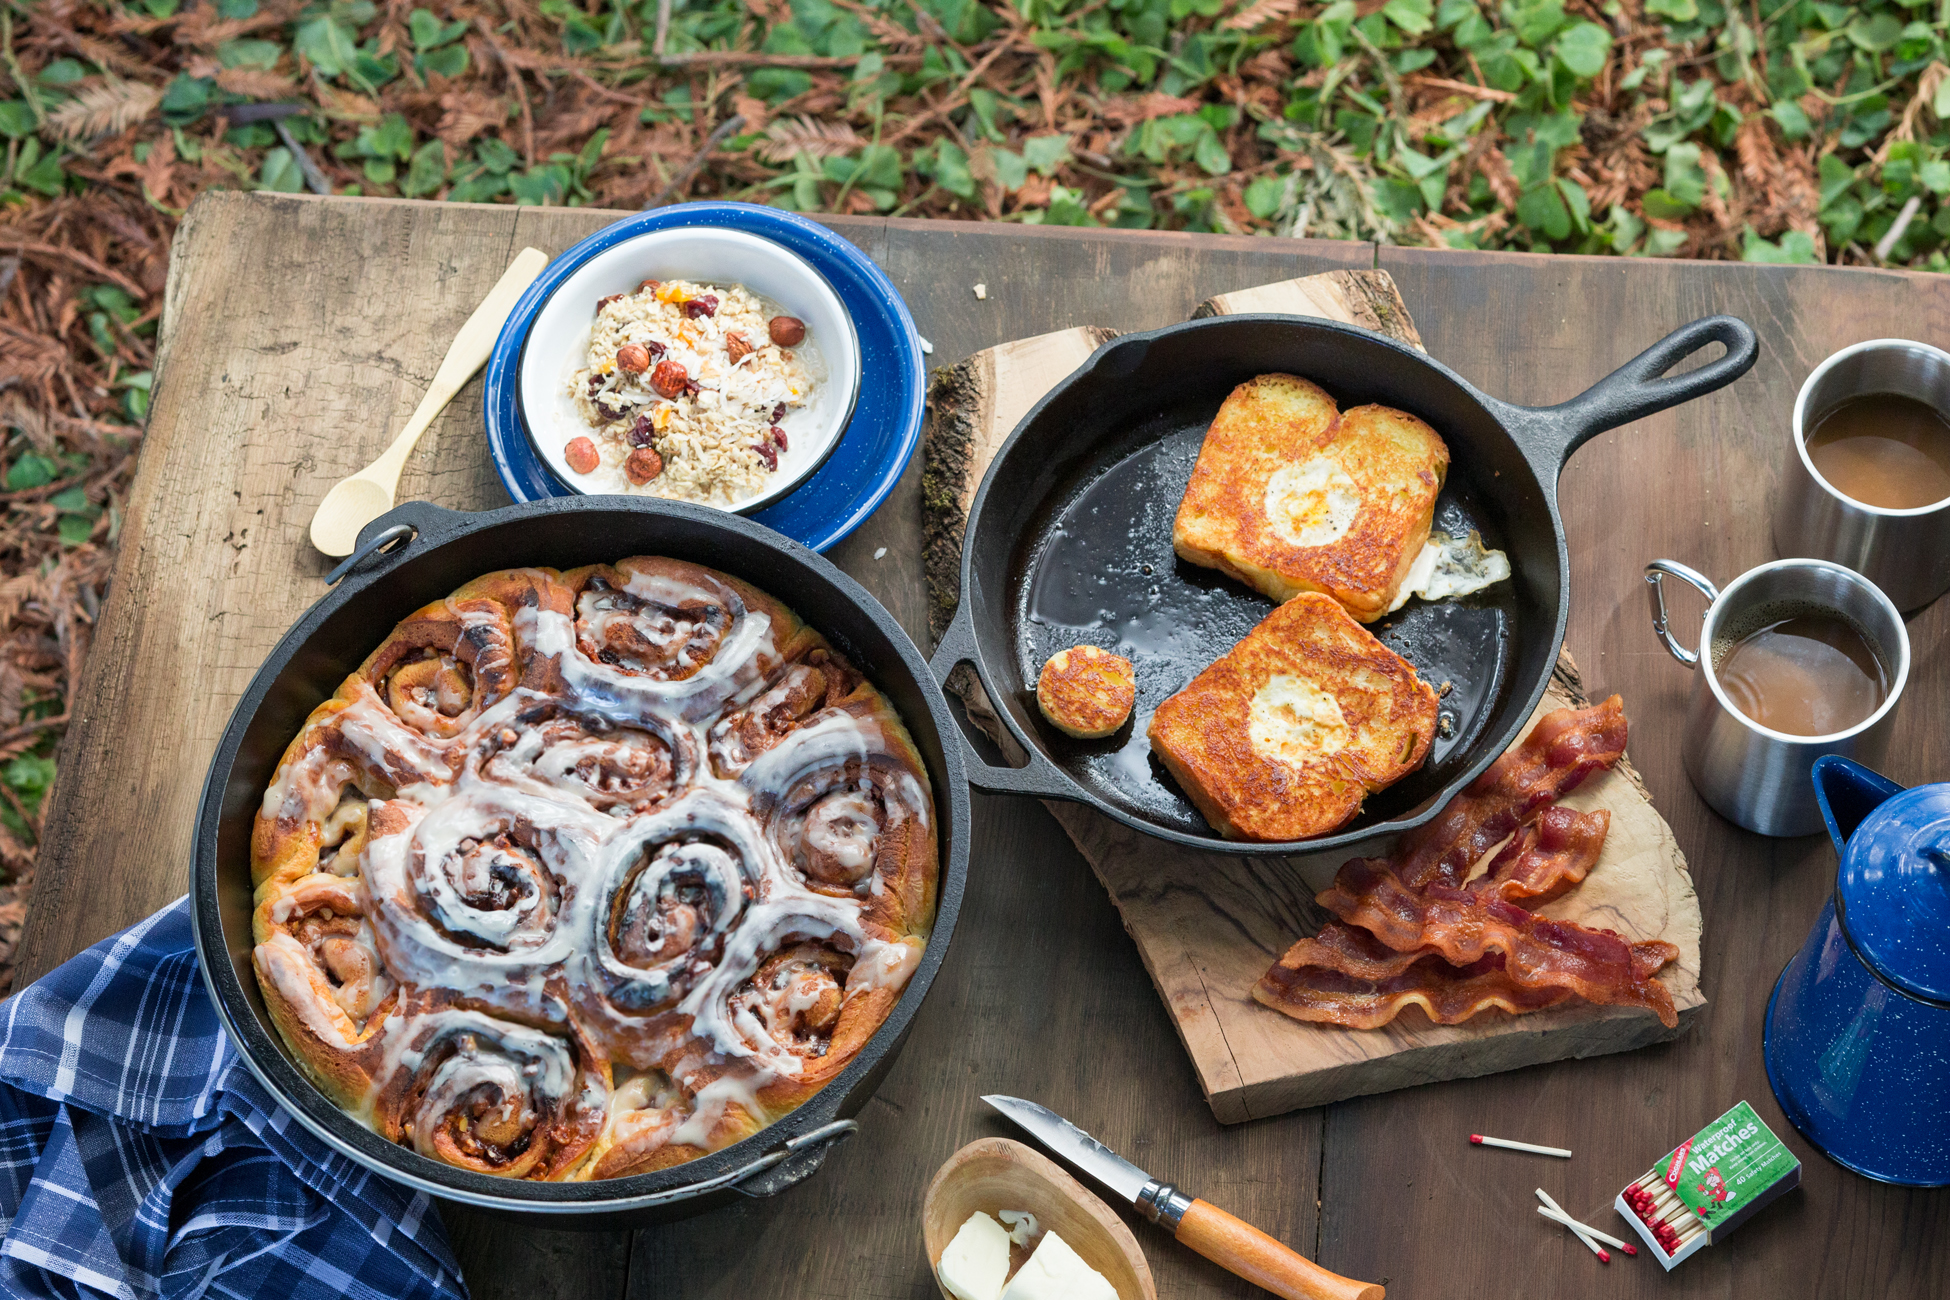 30 Best Dutch Oven Camping Recipes - Campfire Dutch Oven Cooking